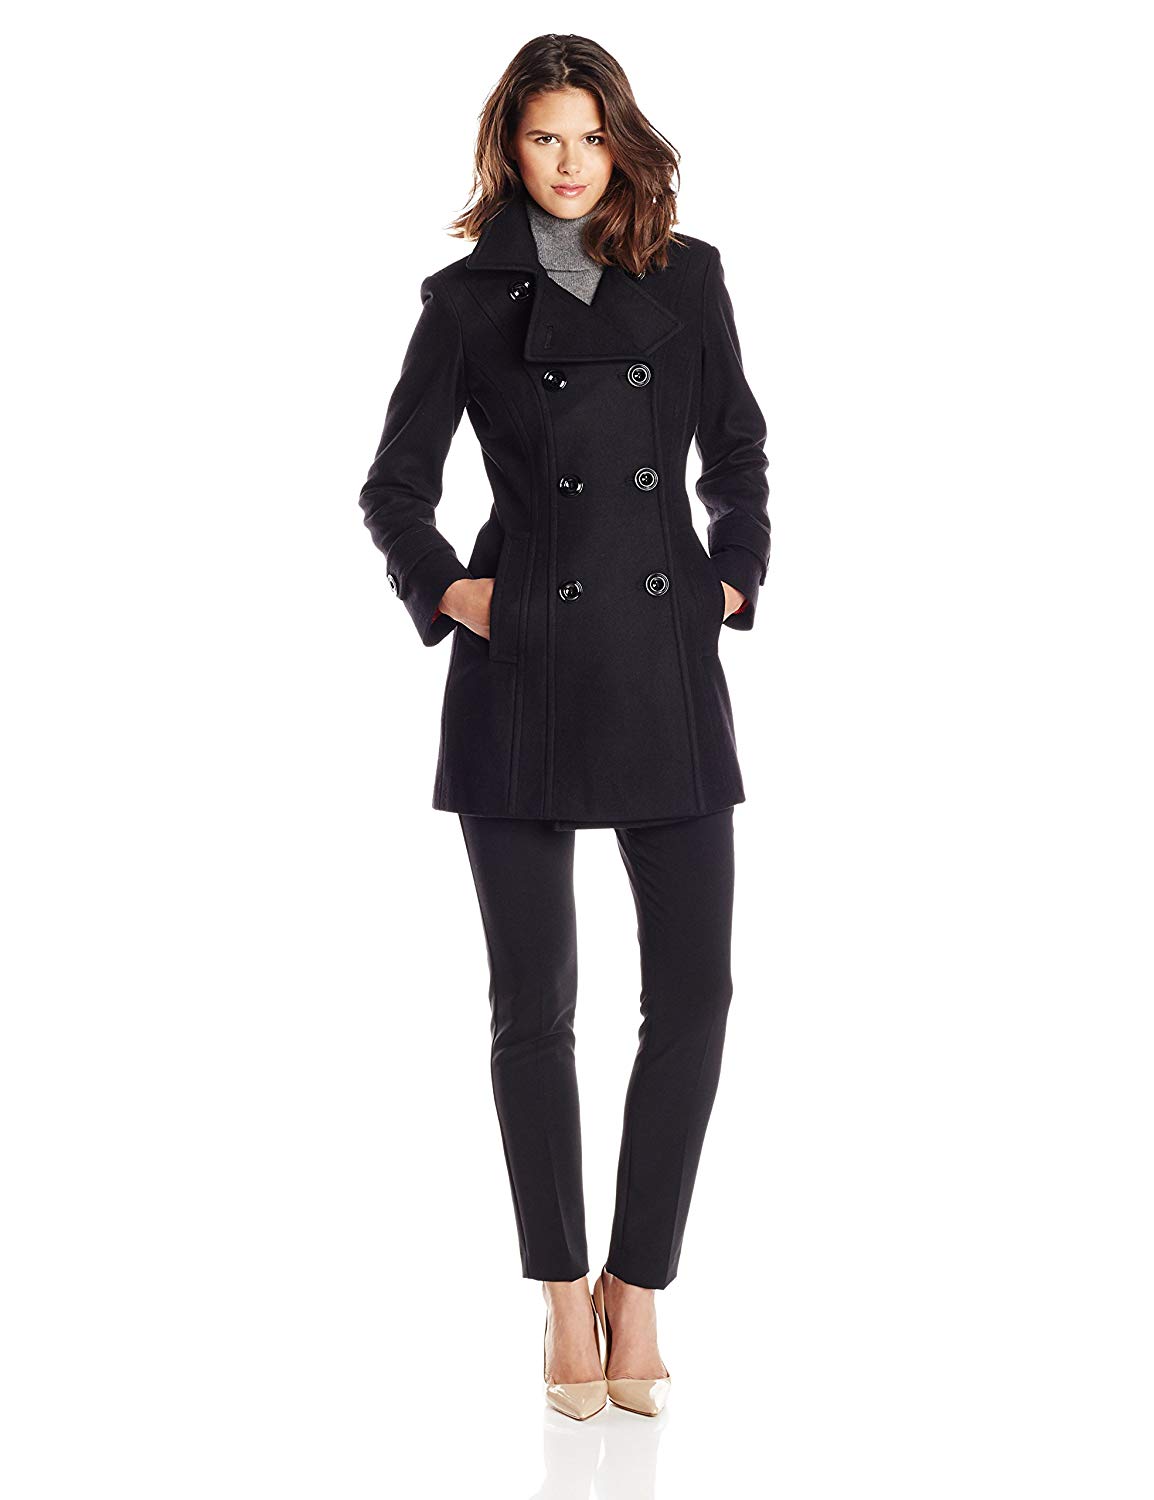 Anne Klein Women's Classic Double Breasted Wool Coat,, Black, Size X ...